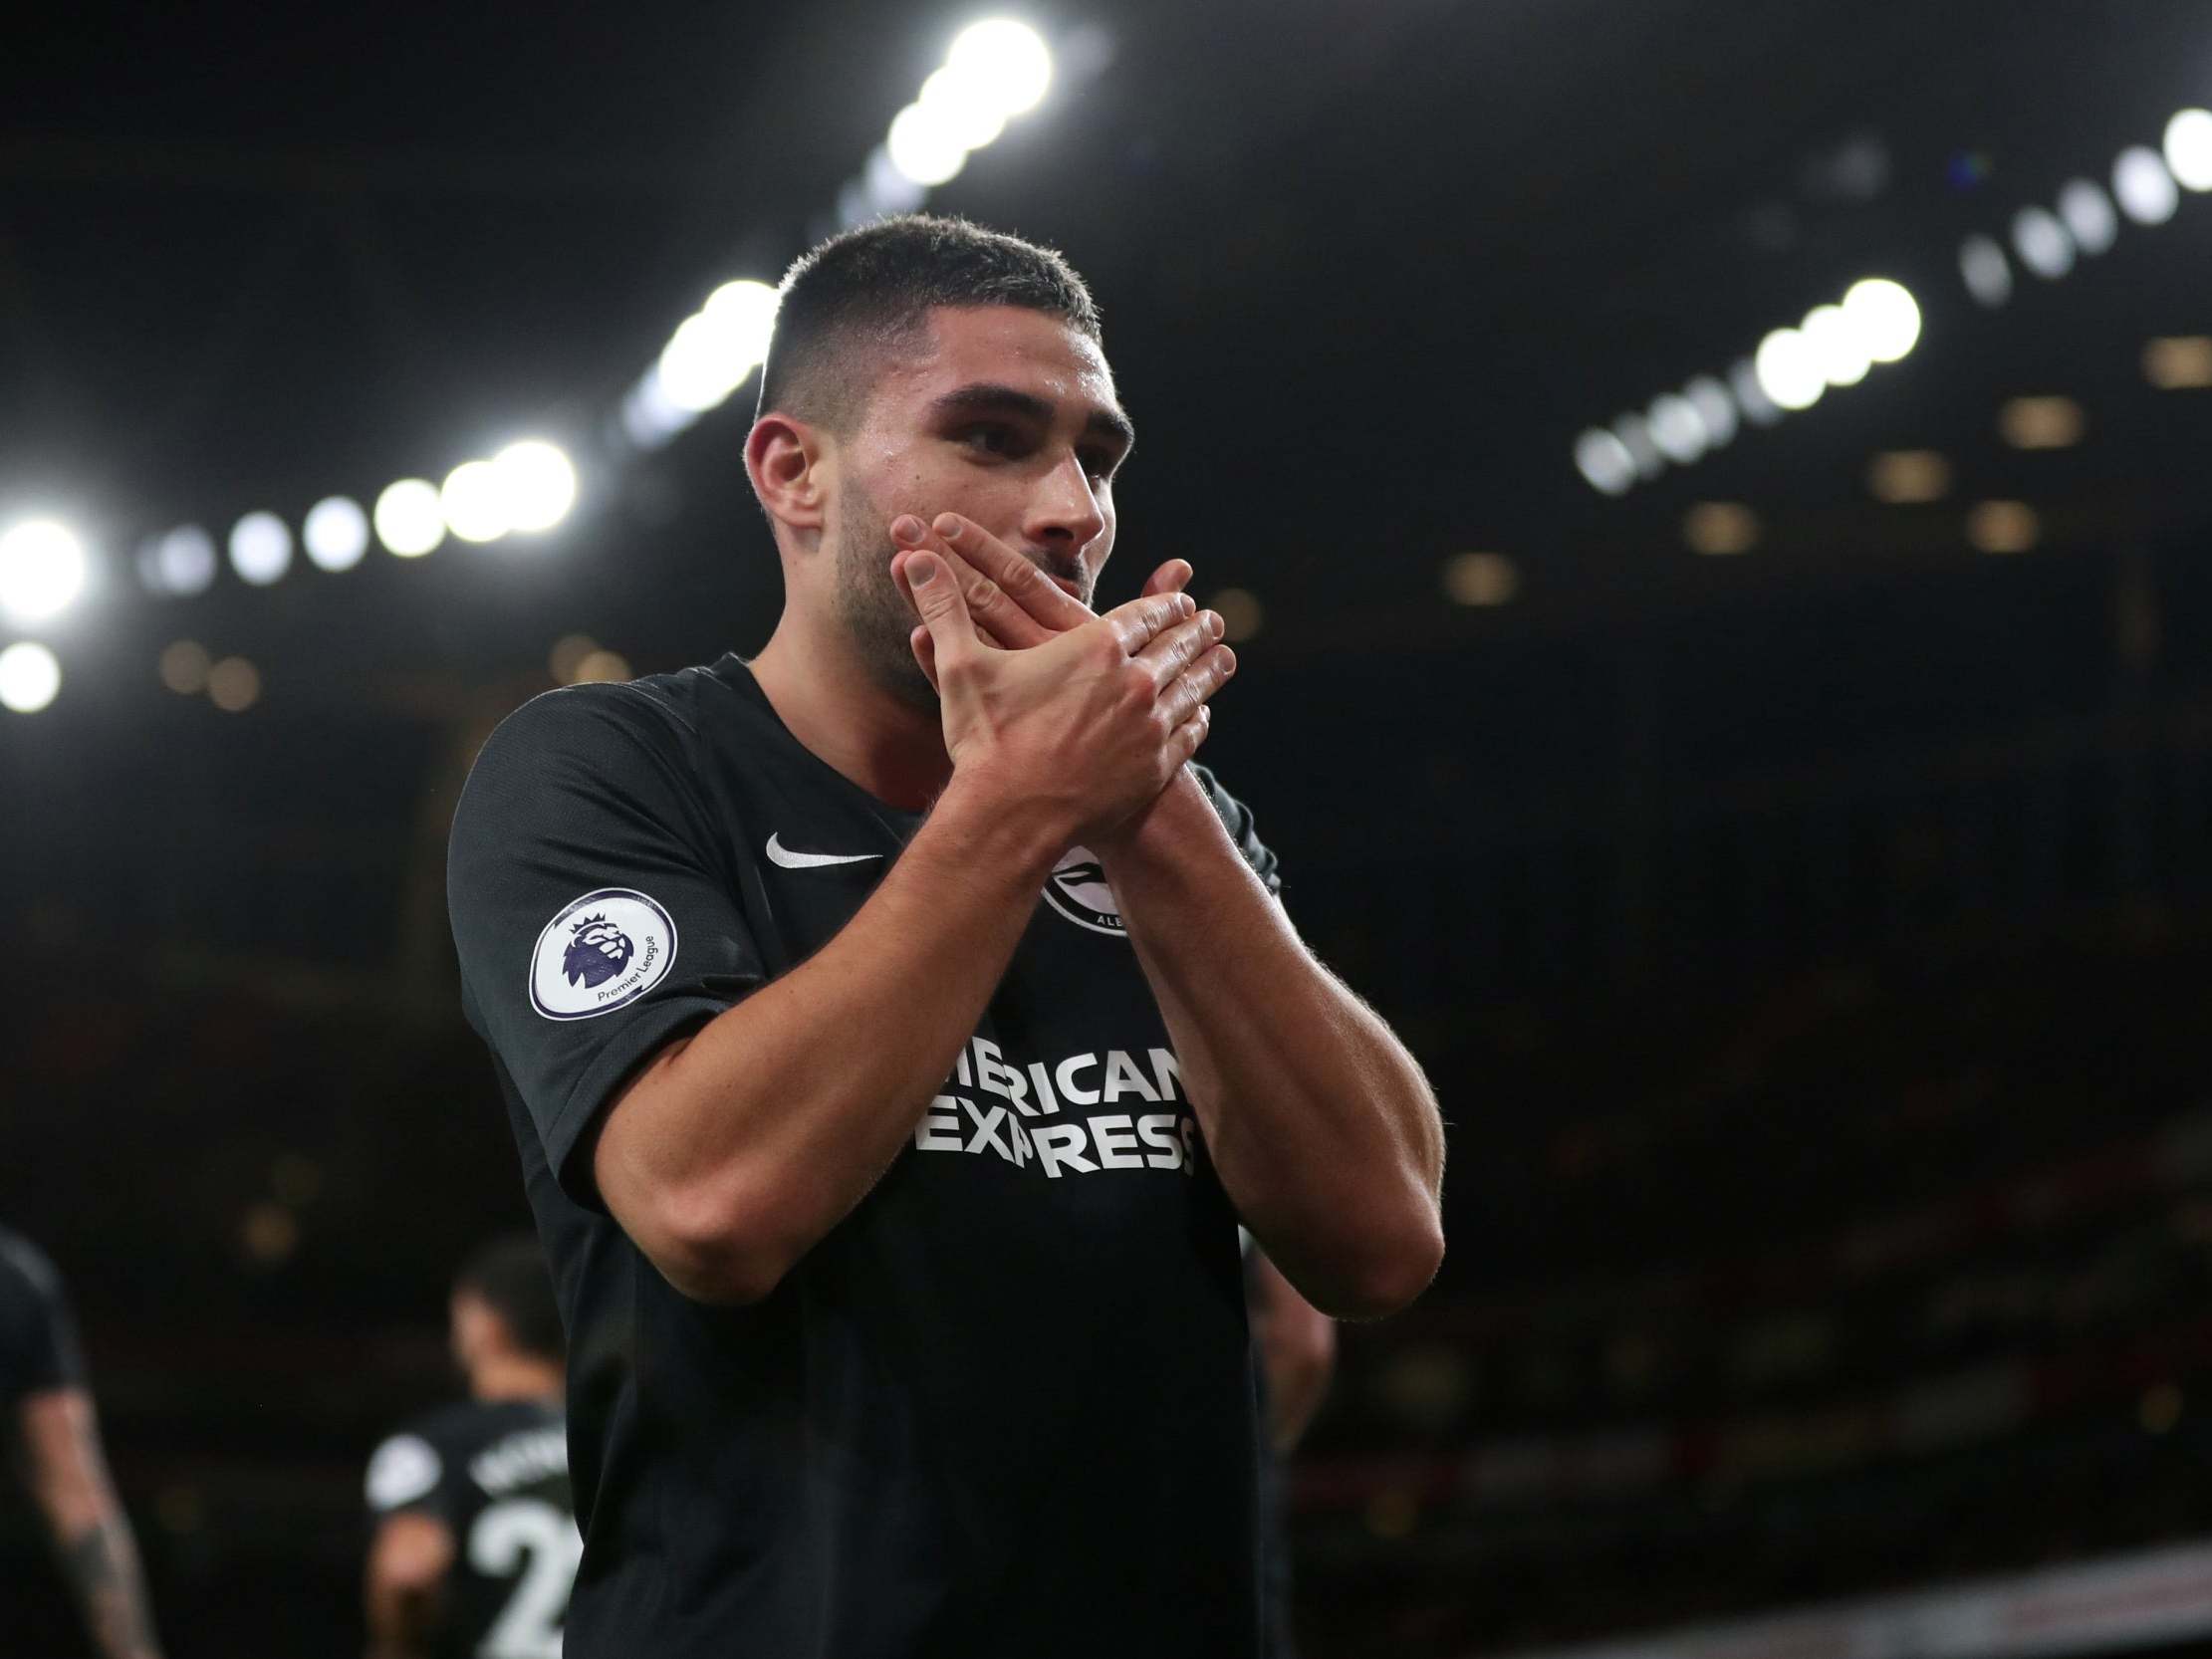 Maupay struck the decisive blow to condemn Arsenal to defeat